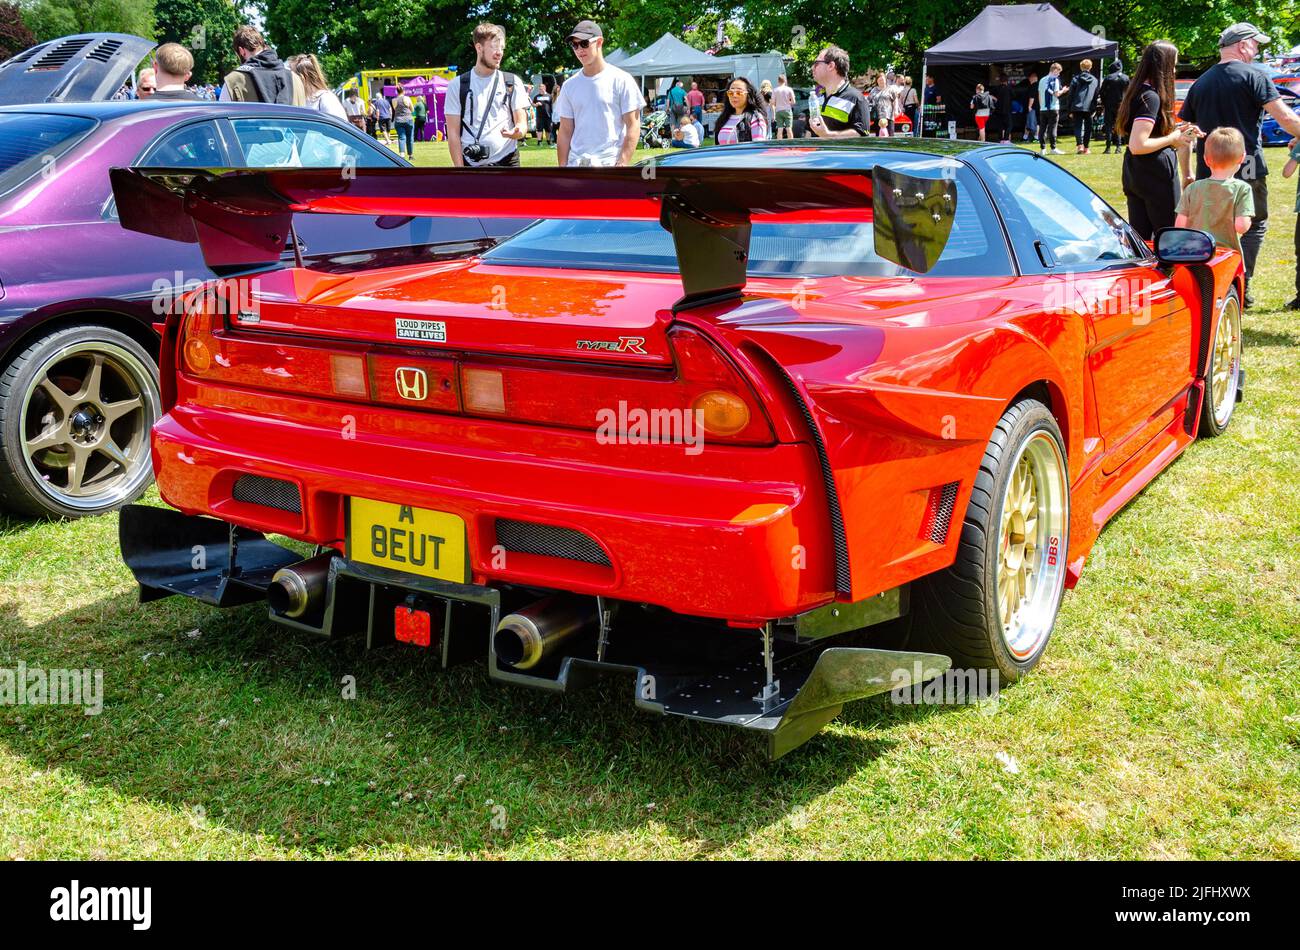 Rear view of a red 1992 Honda NSX sports car at The Berkshire Motor Show in Reading, UK Stock Photo